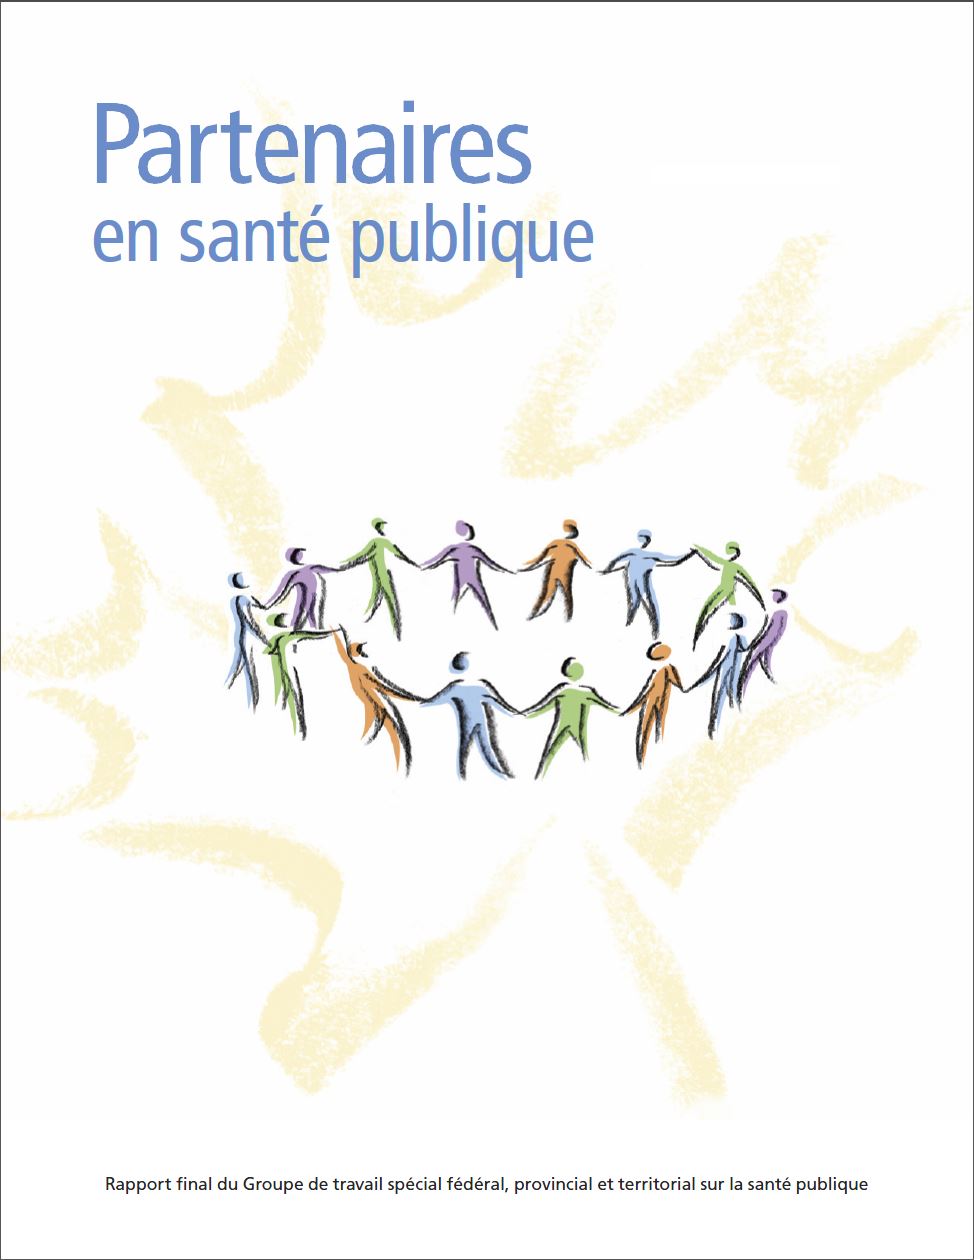 Image of a Partners in Health Summary Report cover page in French